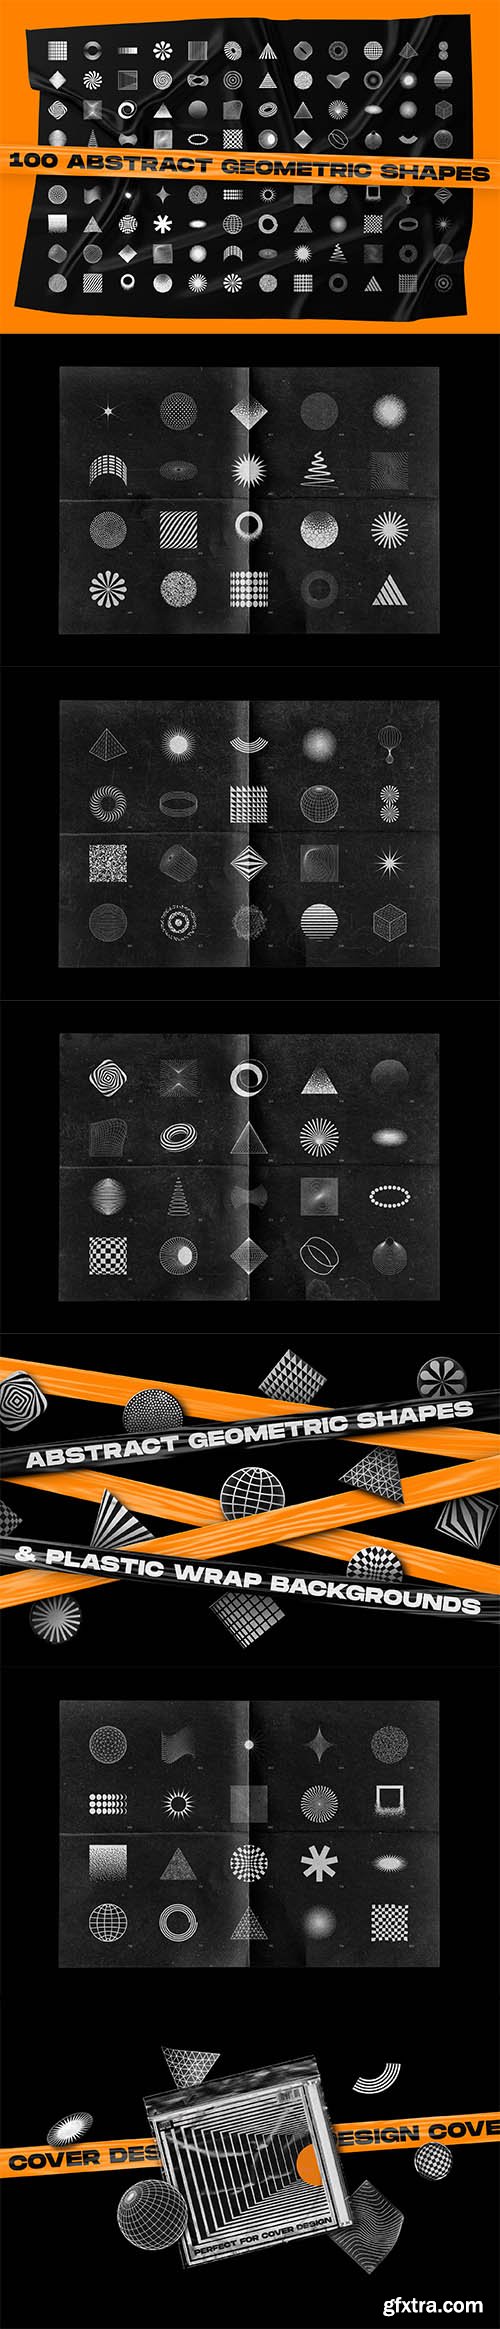 Abstract Shapes & Backgrounds